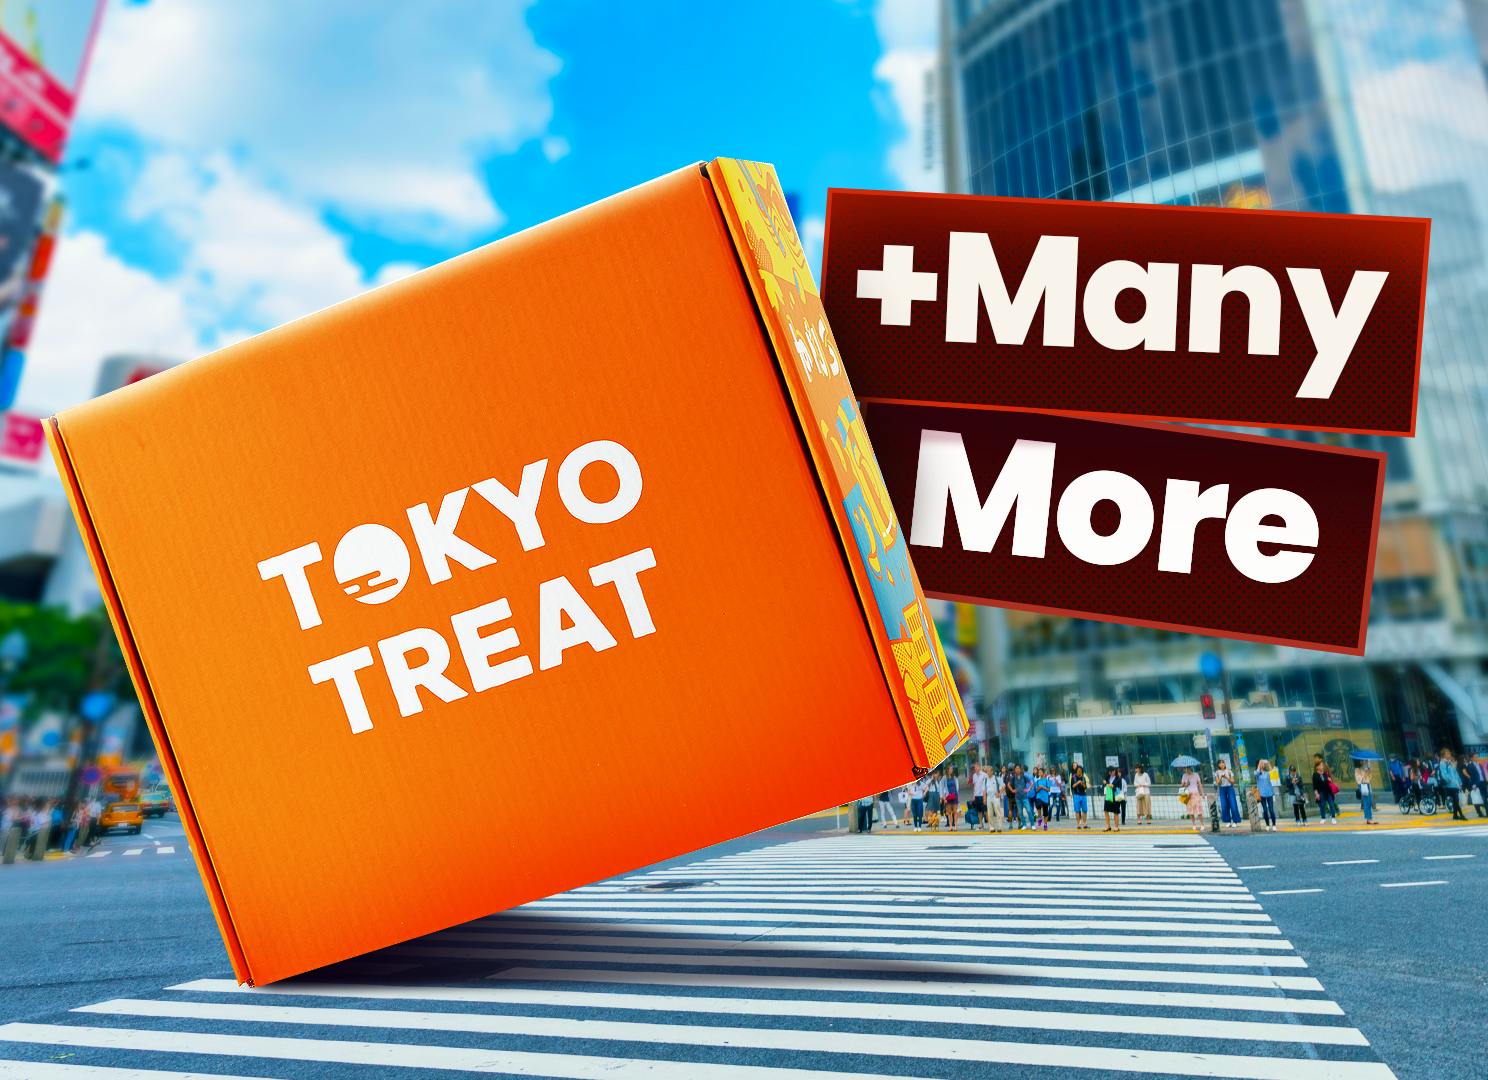 The orange TokyoTreat box sits in Tokyo's famous Shibuya Scramble Crossing, surrounded by views of Tokyo.